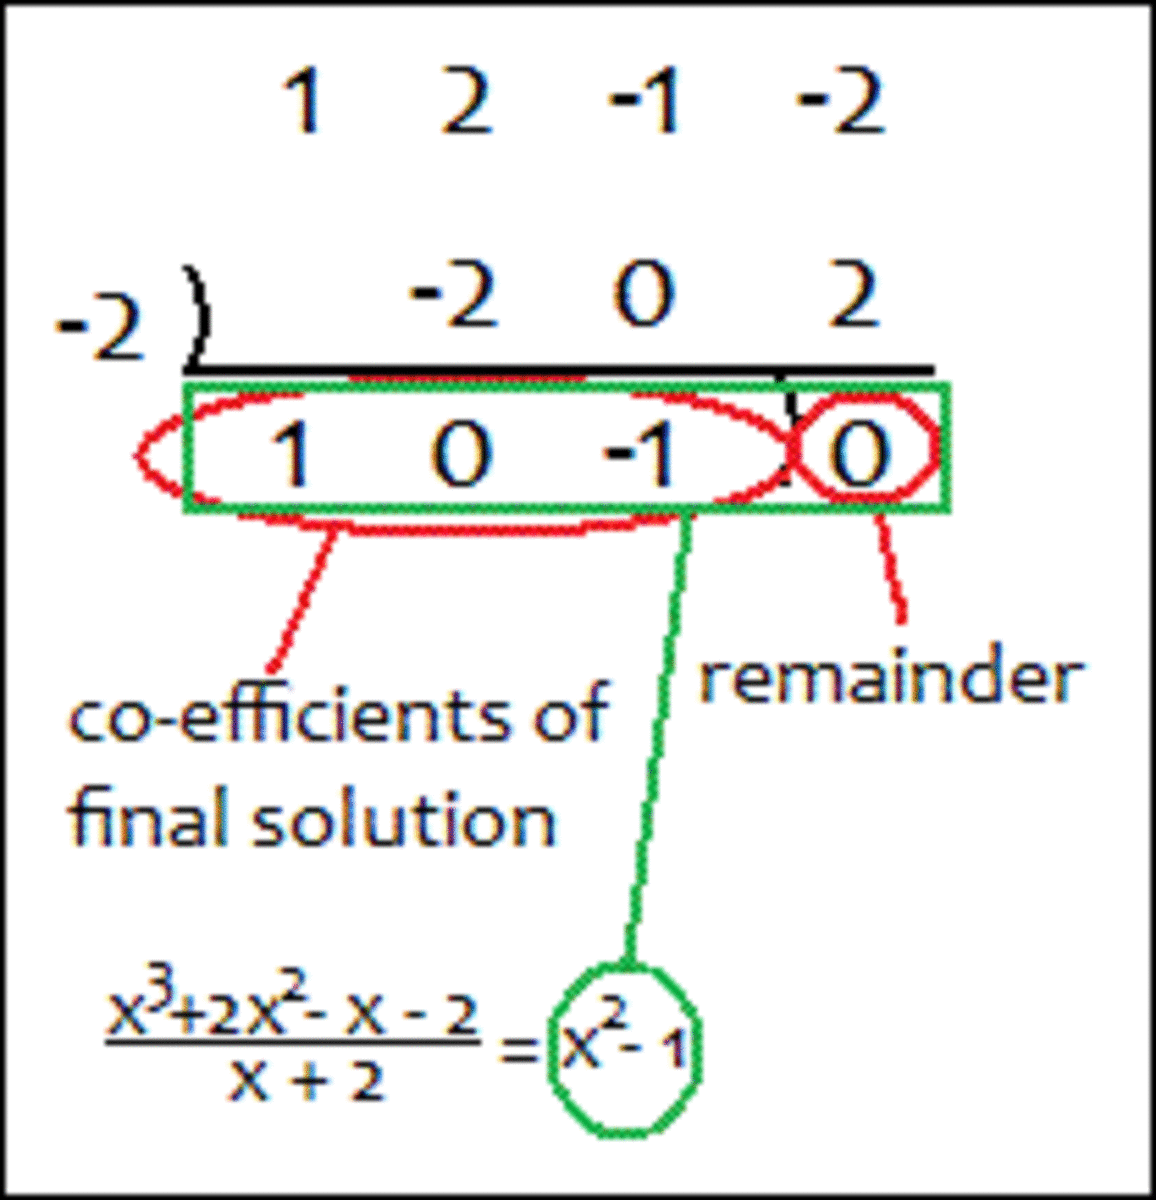 Final solution to the division equation (co-efficient of x is 0, remainder is 0)